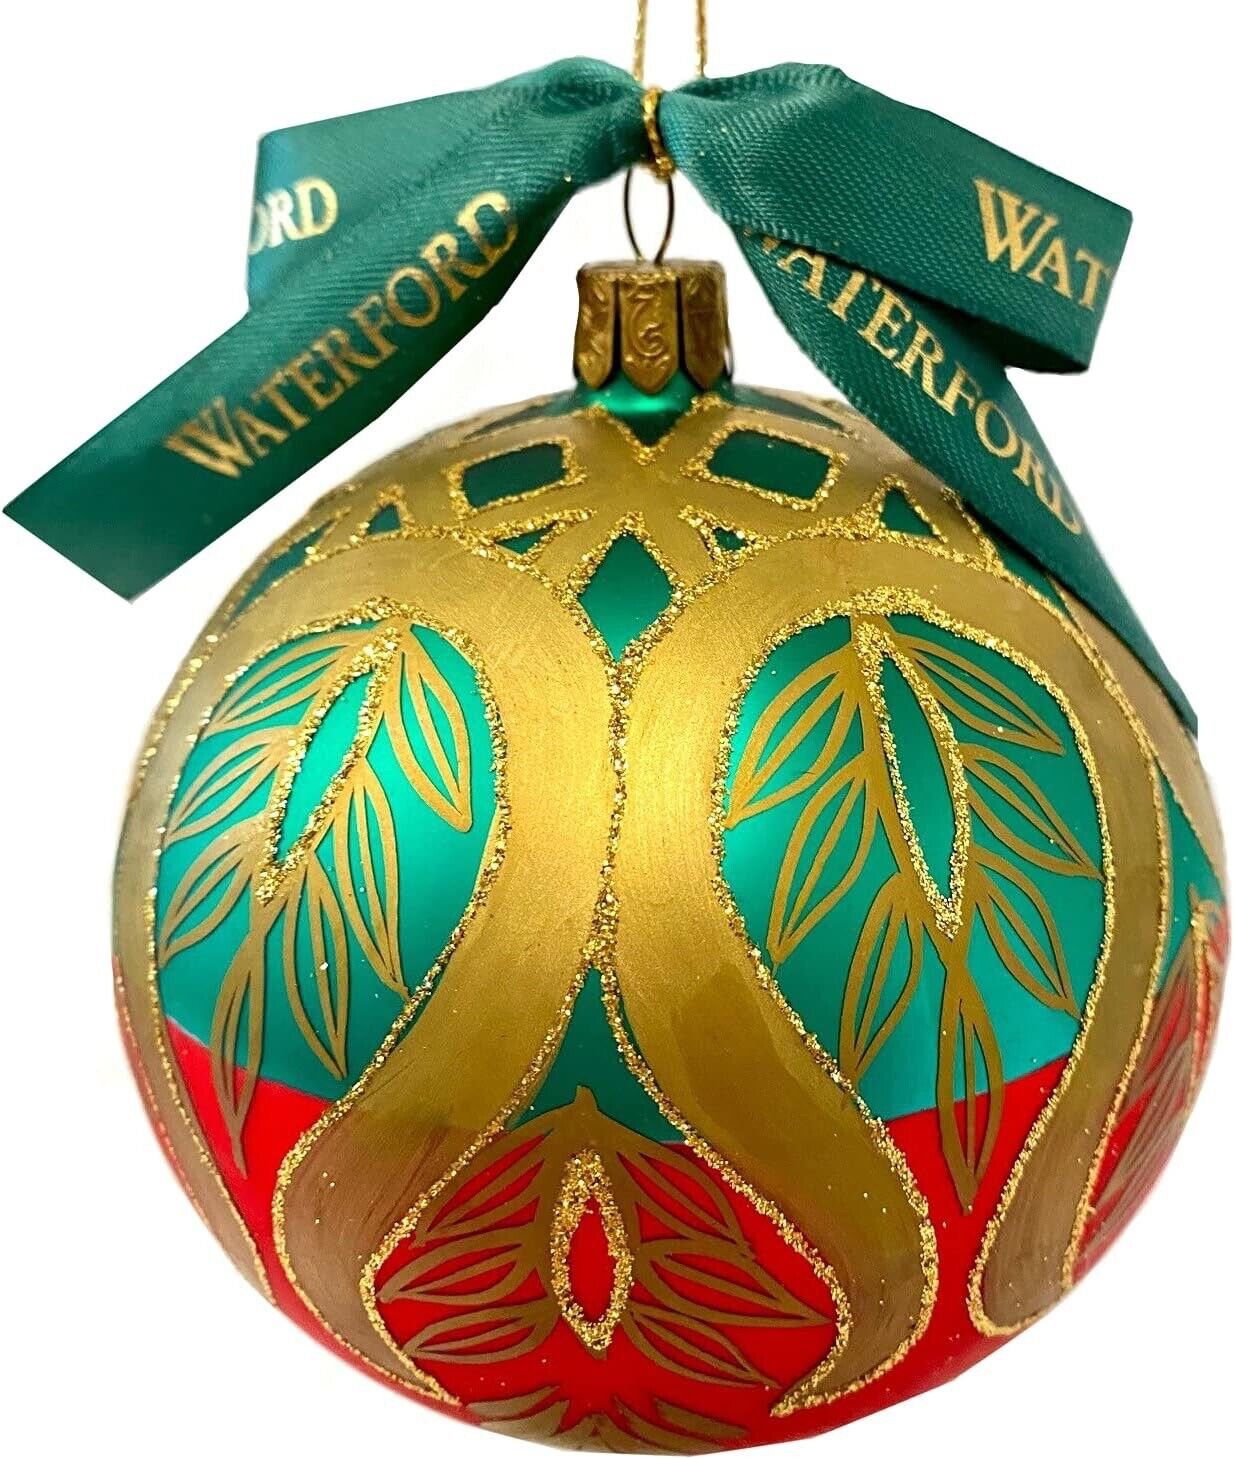 Waterford Holiday Heirlooms Peacock Ball Christmas Ornament w/ Original Box 1997